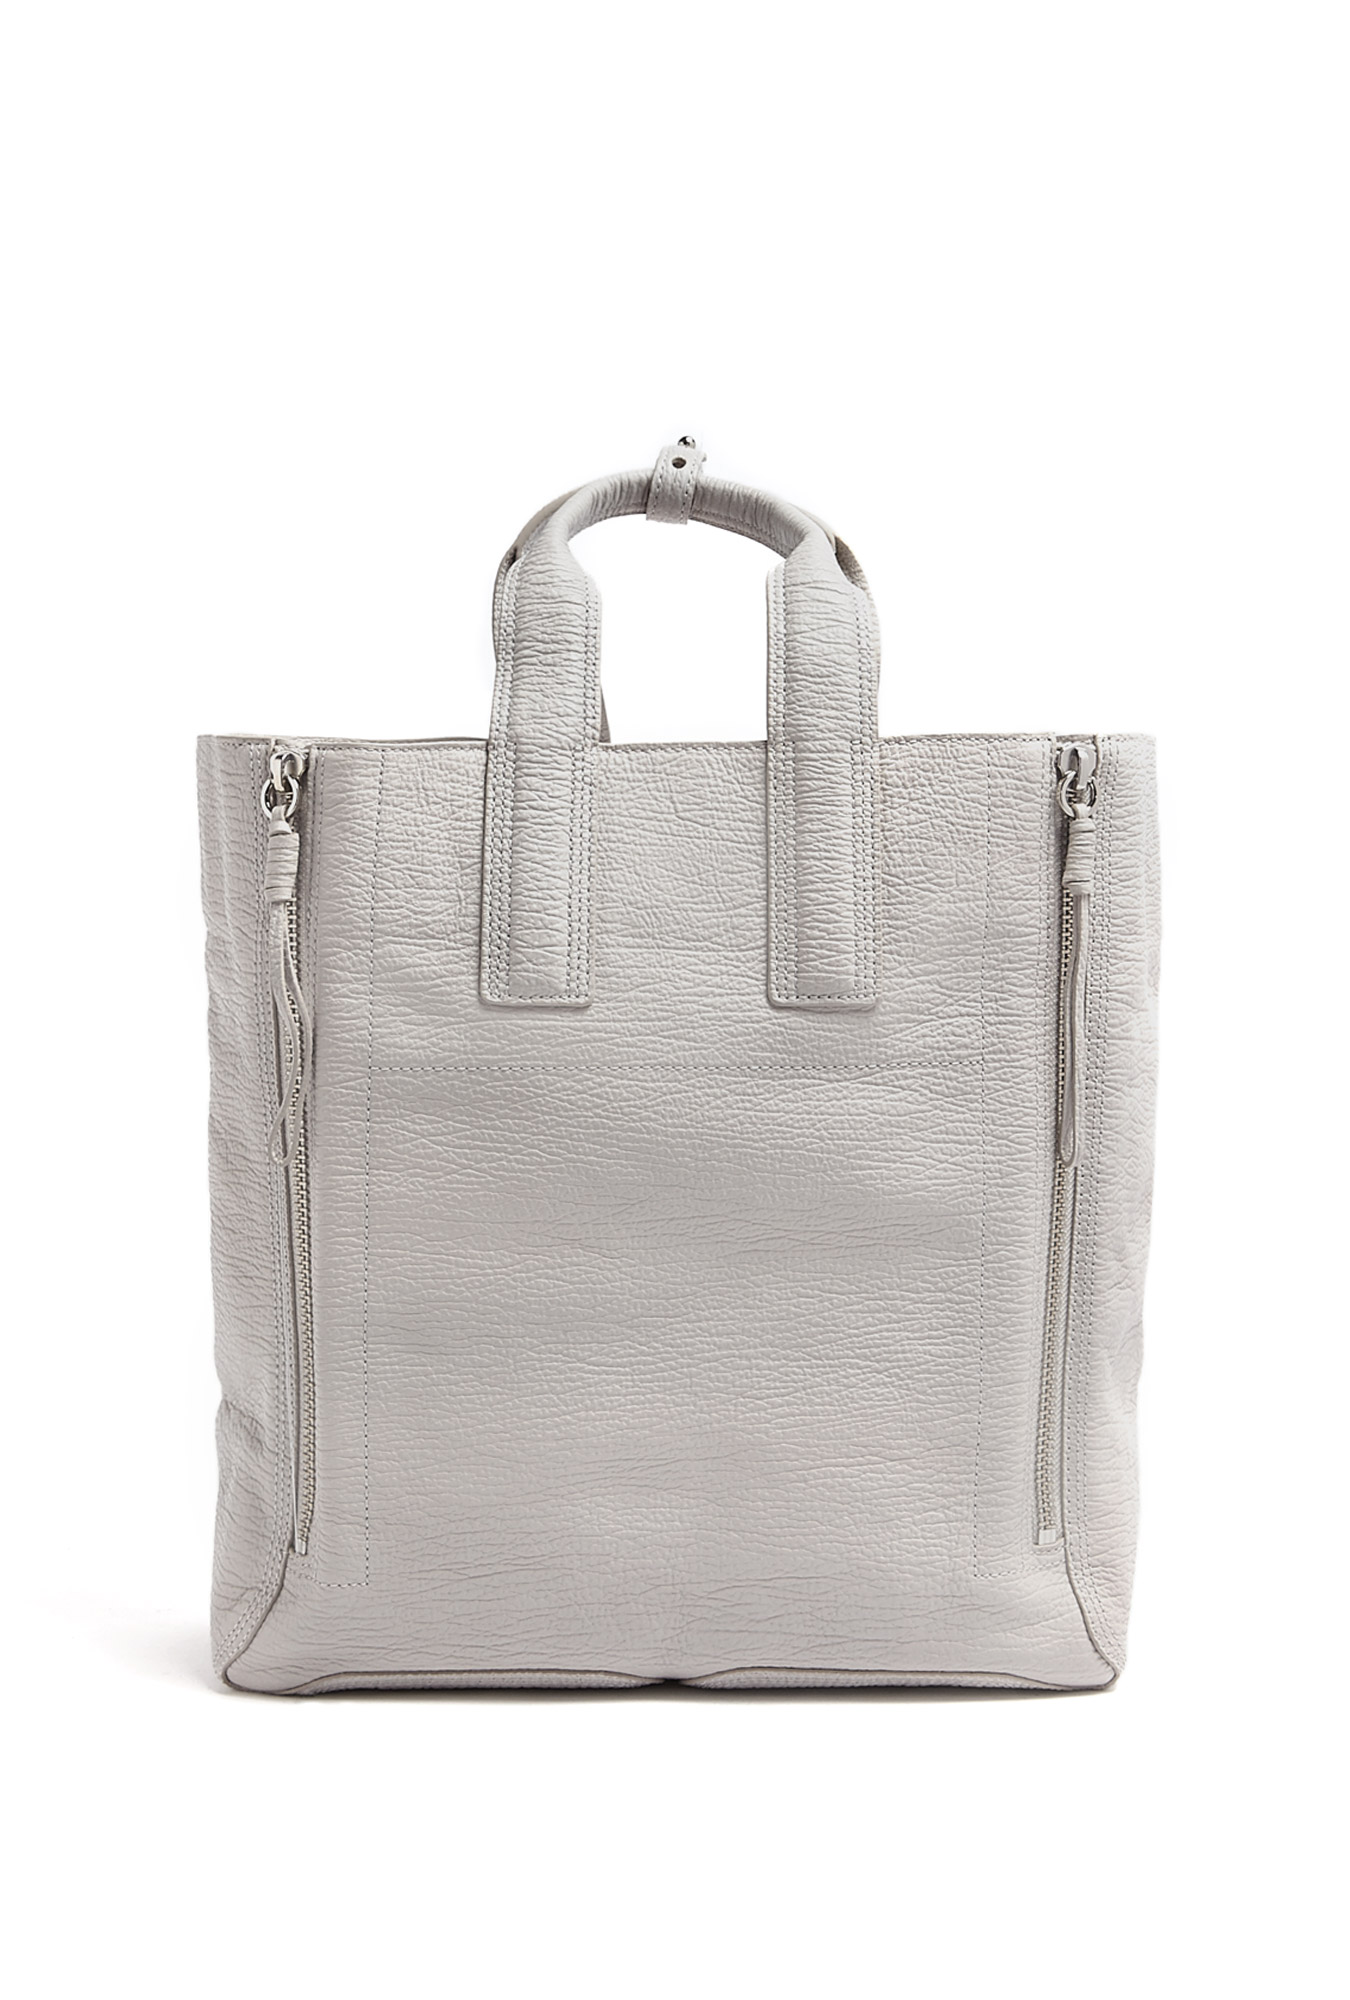 3.1 Phillip Lim Feather Neutral Shark Embossed Pashli Large Tote in ...